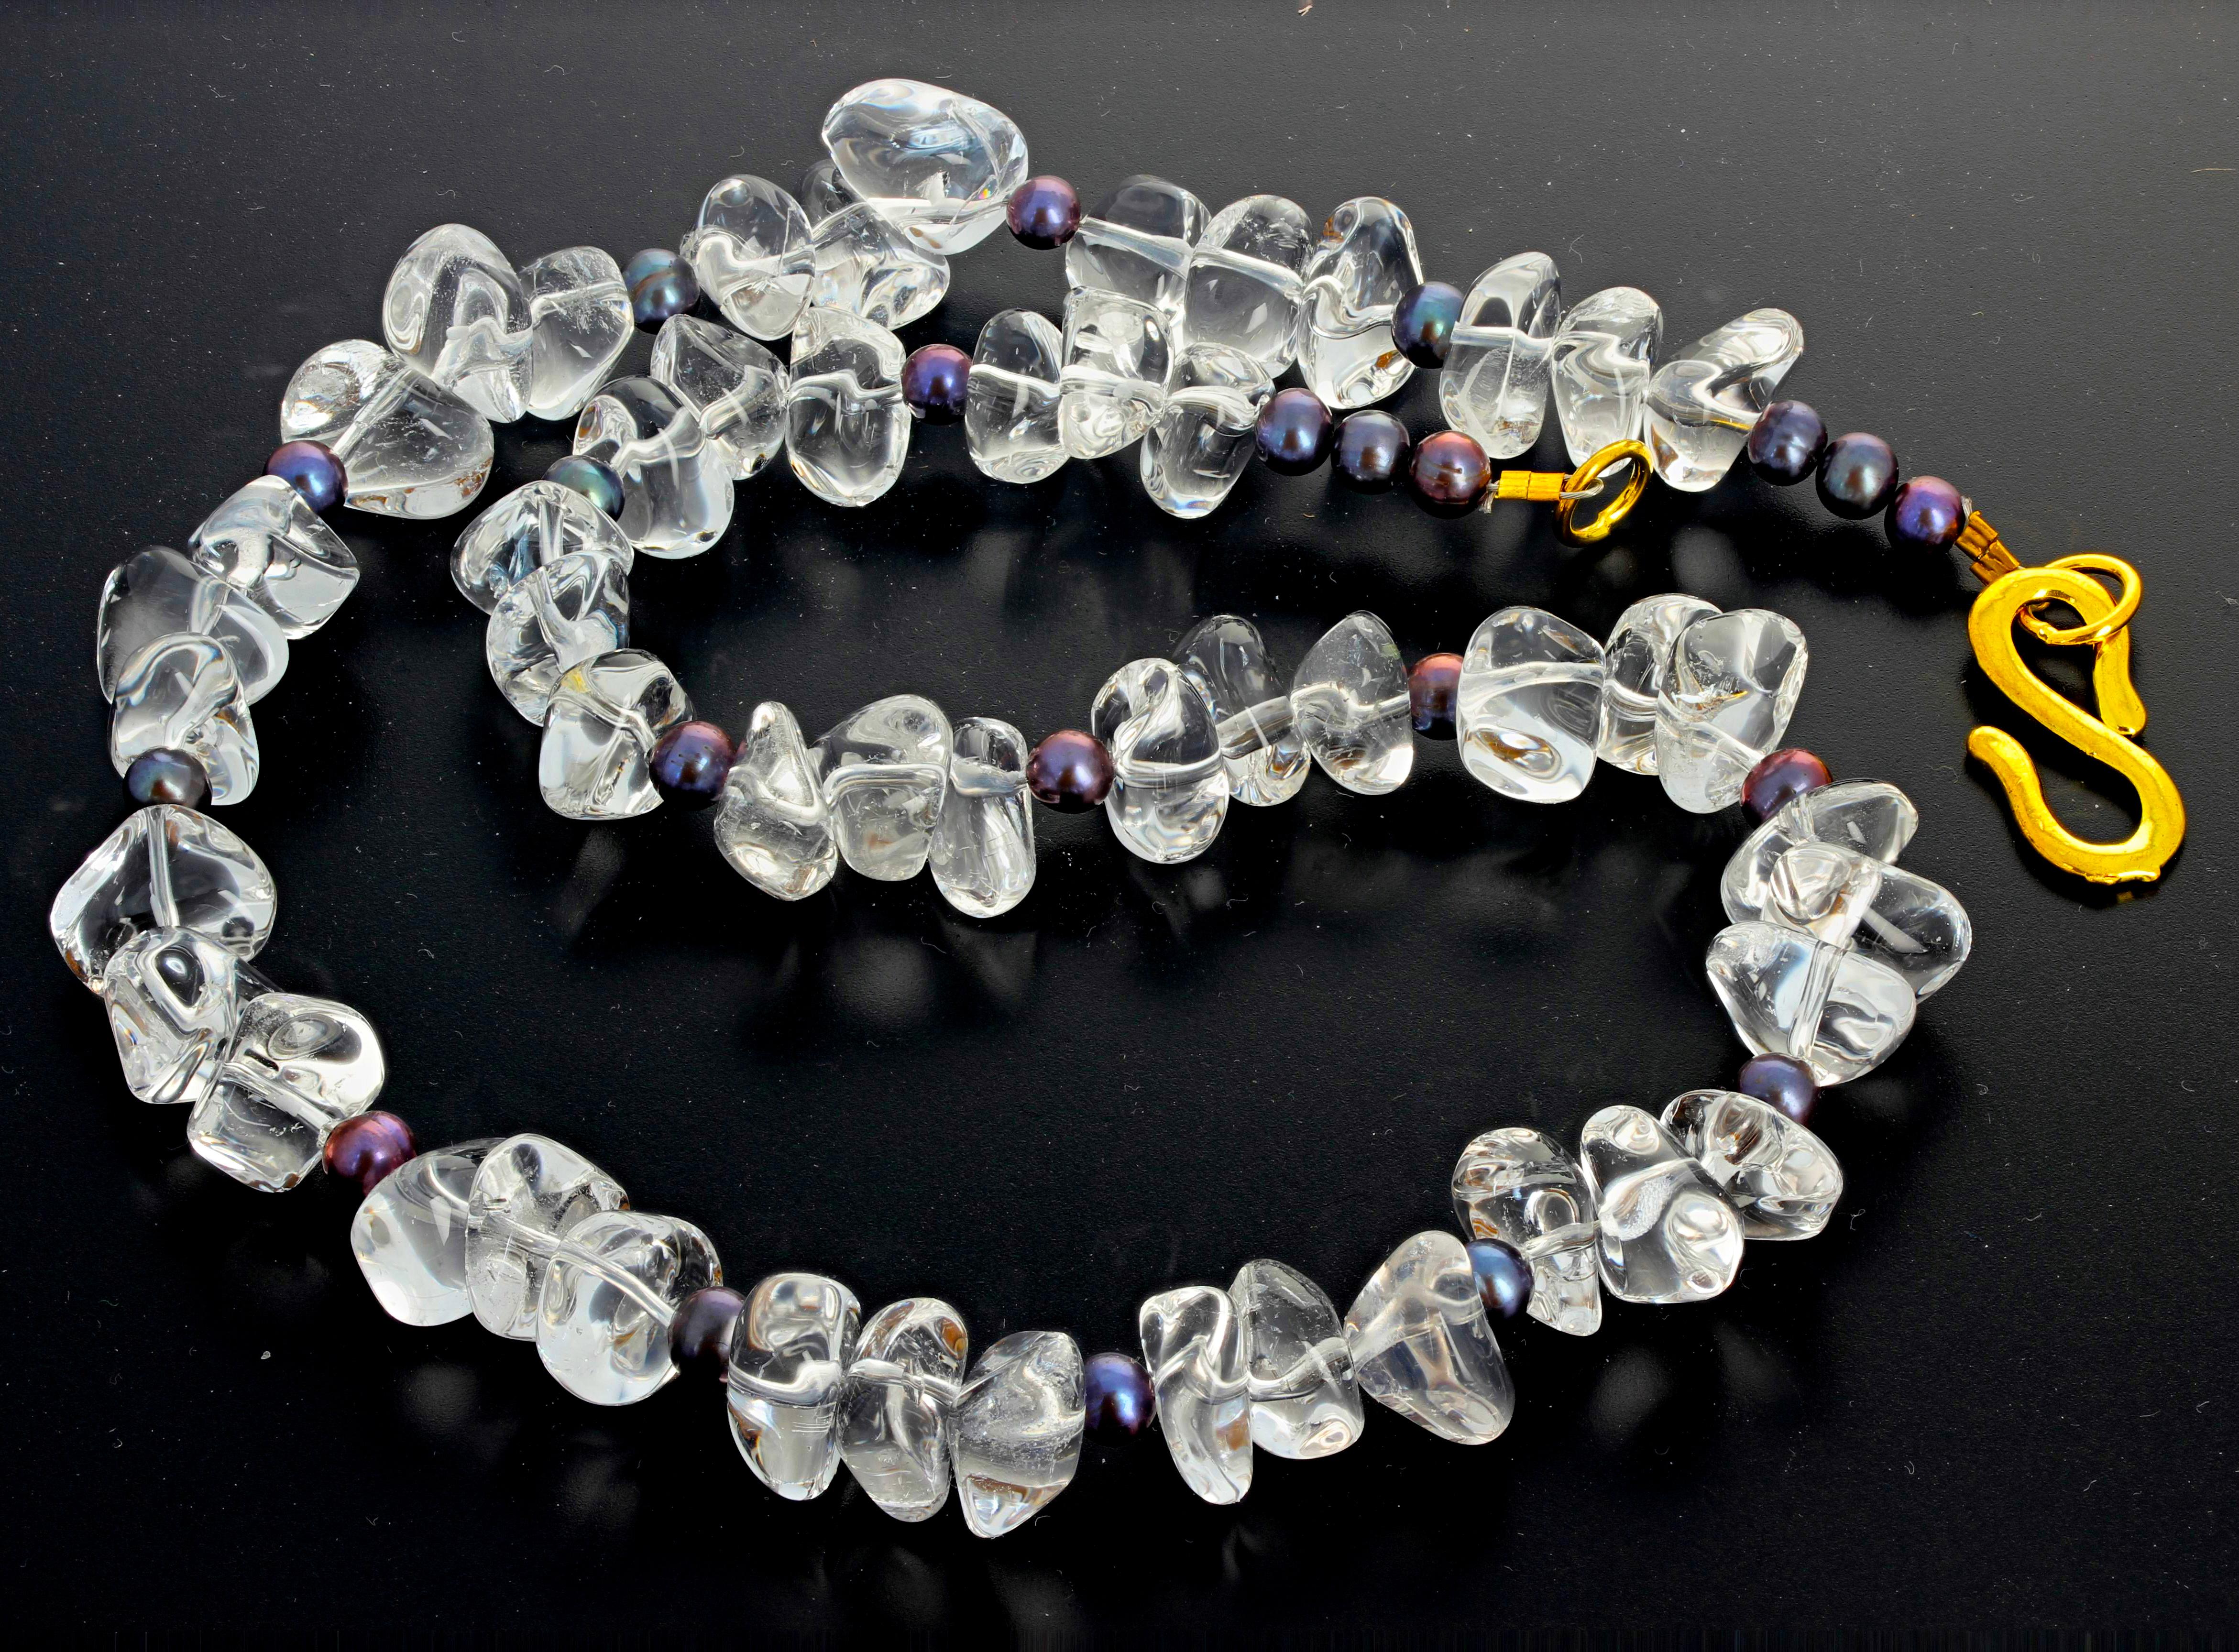 Highly polished unique chunks of flippy floppy silvery translucent Quartz accented with small round Peacock Pearls in this 19.25 inch long necklace with easy to use goldy tone hook clasp.  The large Quartz are approximately 13 mm.  More from this